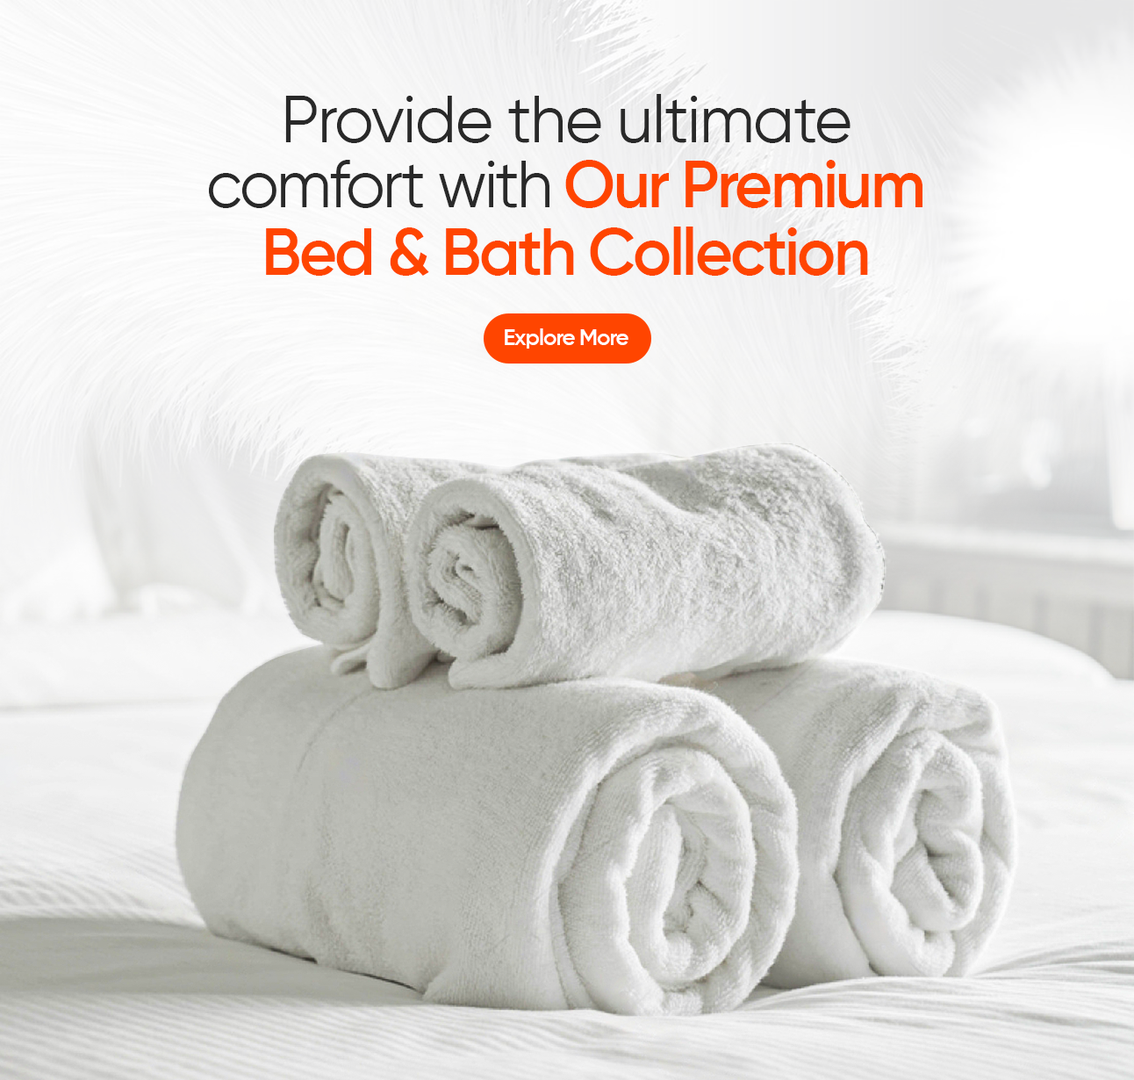 Luxurious bed and bath linens for hotel guests